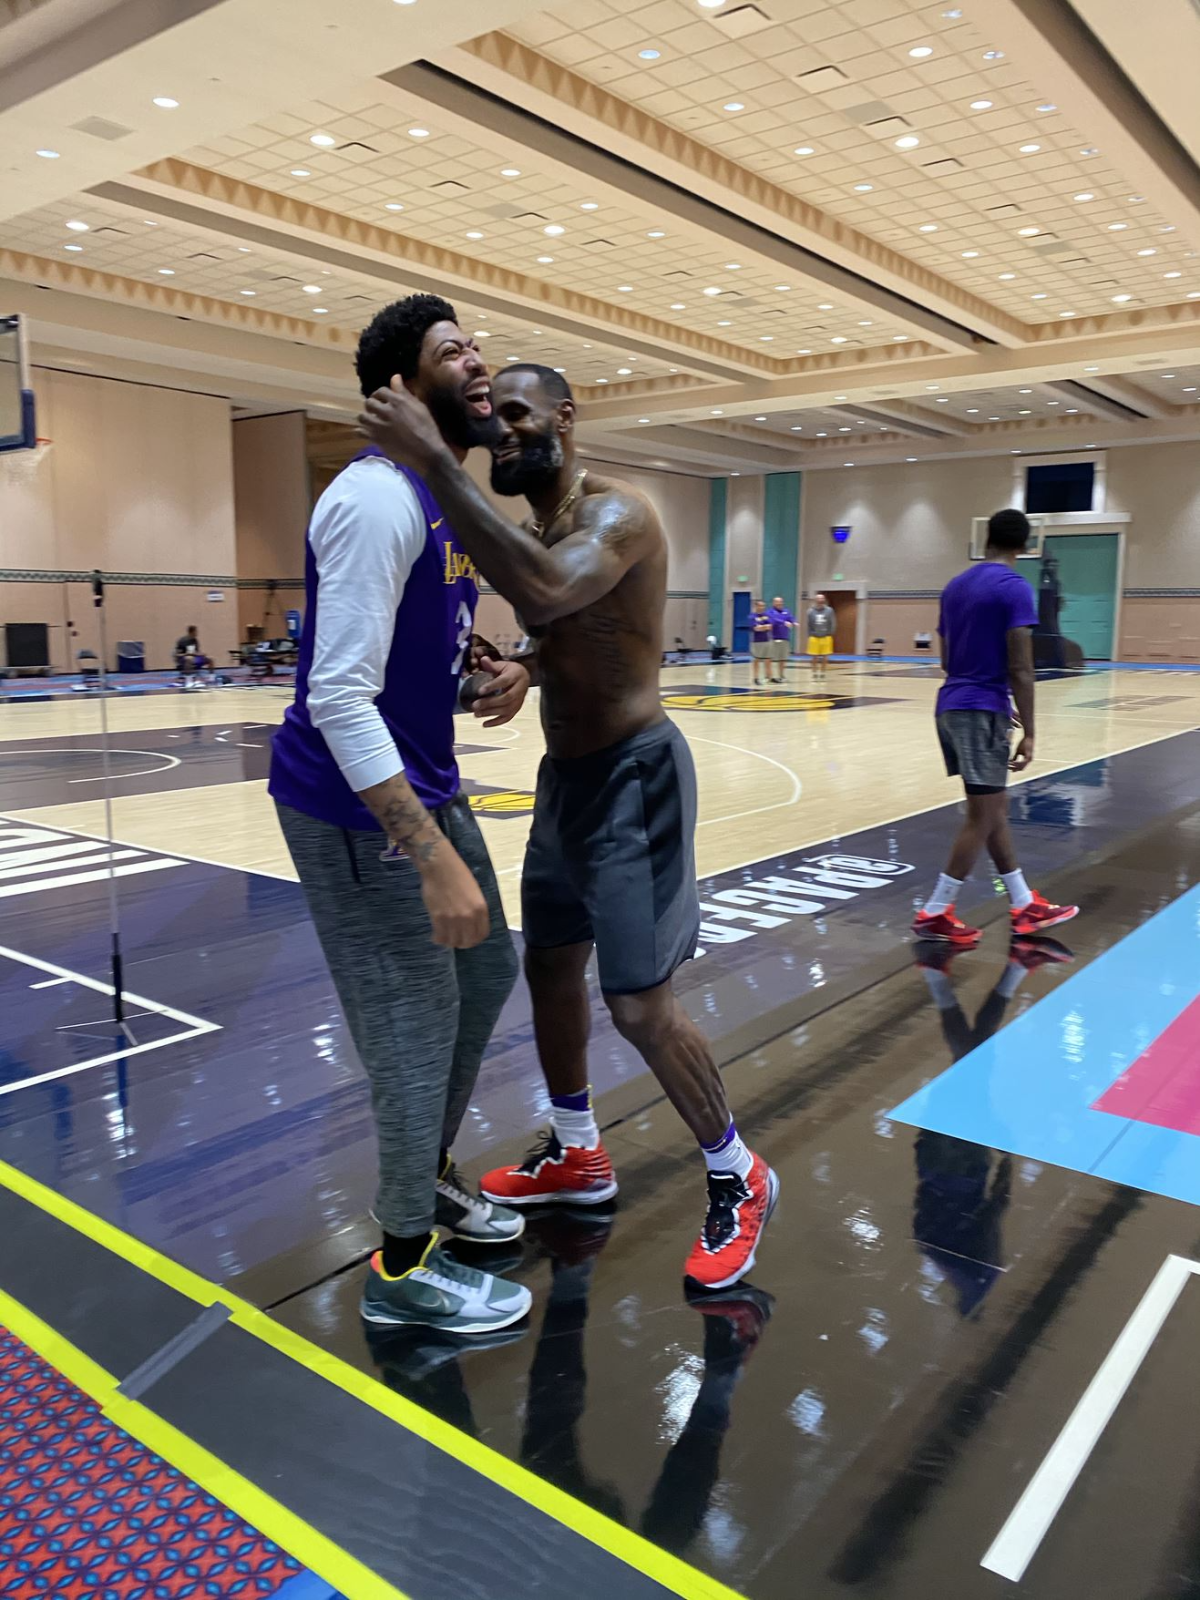 Lakers stars Anthony Davis, left, and LeBron James shares a laugh during an Orlando practice session.